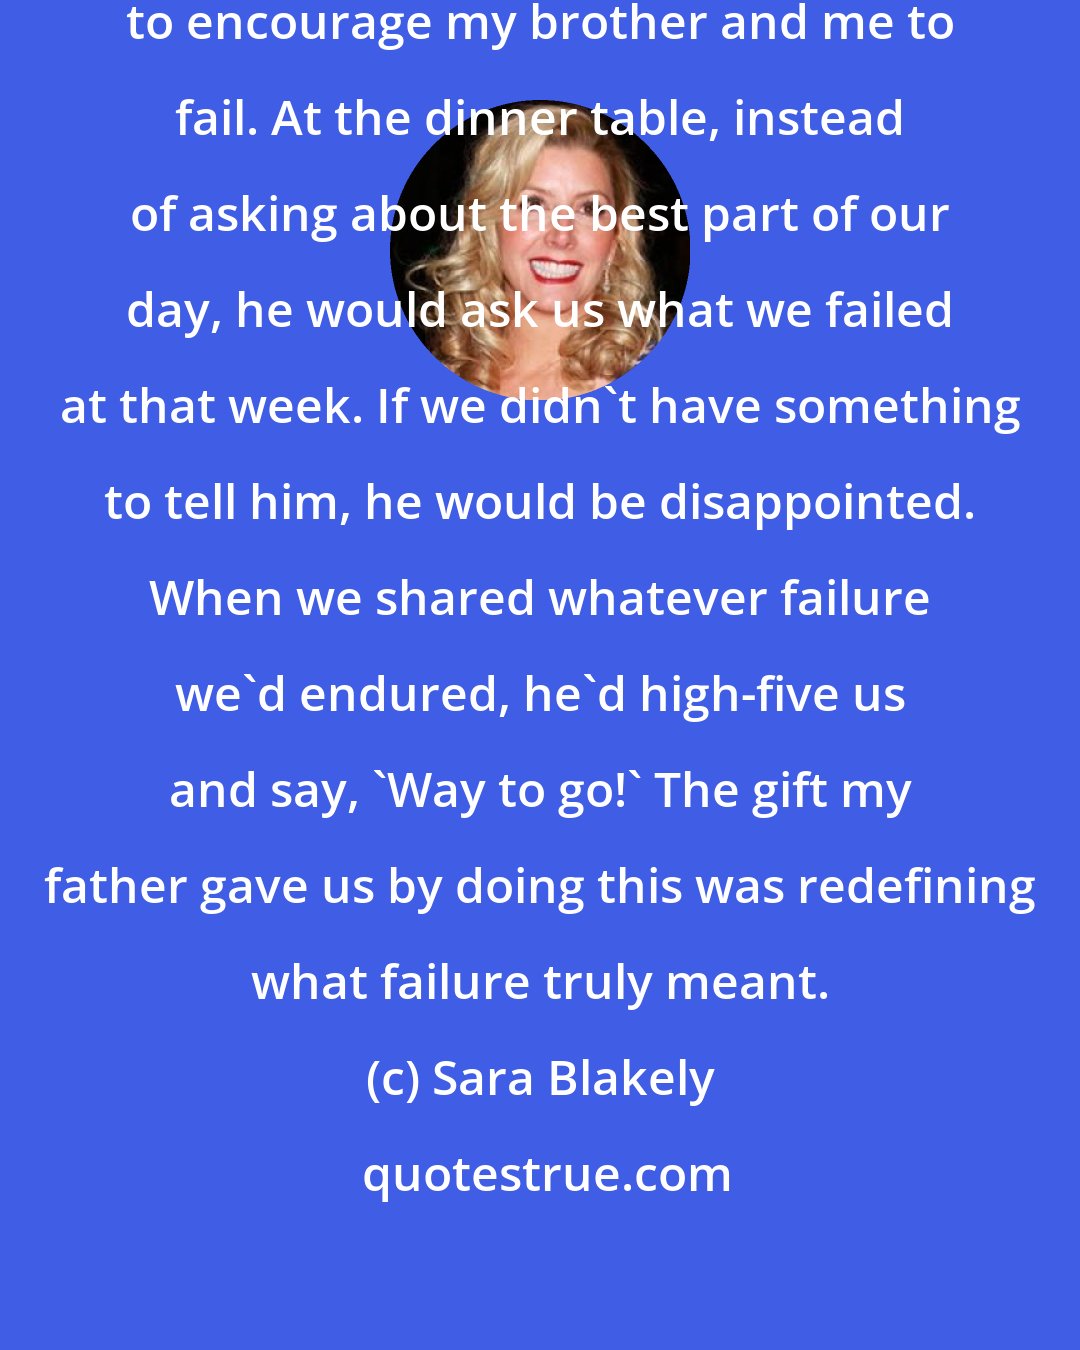 Sara Blakely: When I was a child, my father used to encourage my brother and me to fail. At the dinner table, instead of asking about the best part of our day, he would ask us what we failed at that week. If we didn't have something to tell him, he would be disappointed. When we shared whatever failure we'd endured, he'd high-five us and say, 'Way to go!' The gift my father gave us by doing this was redefining what failure truly meant.